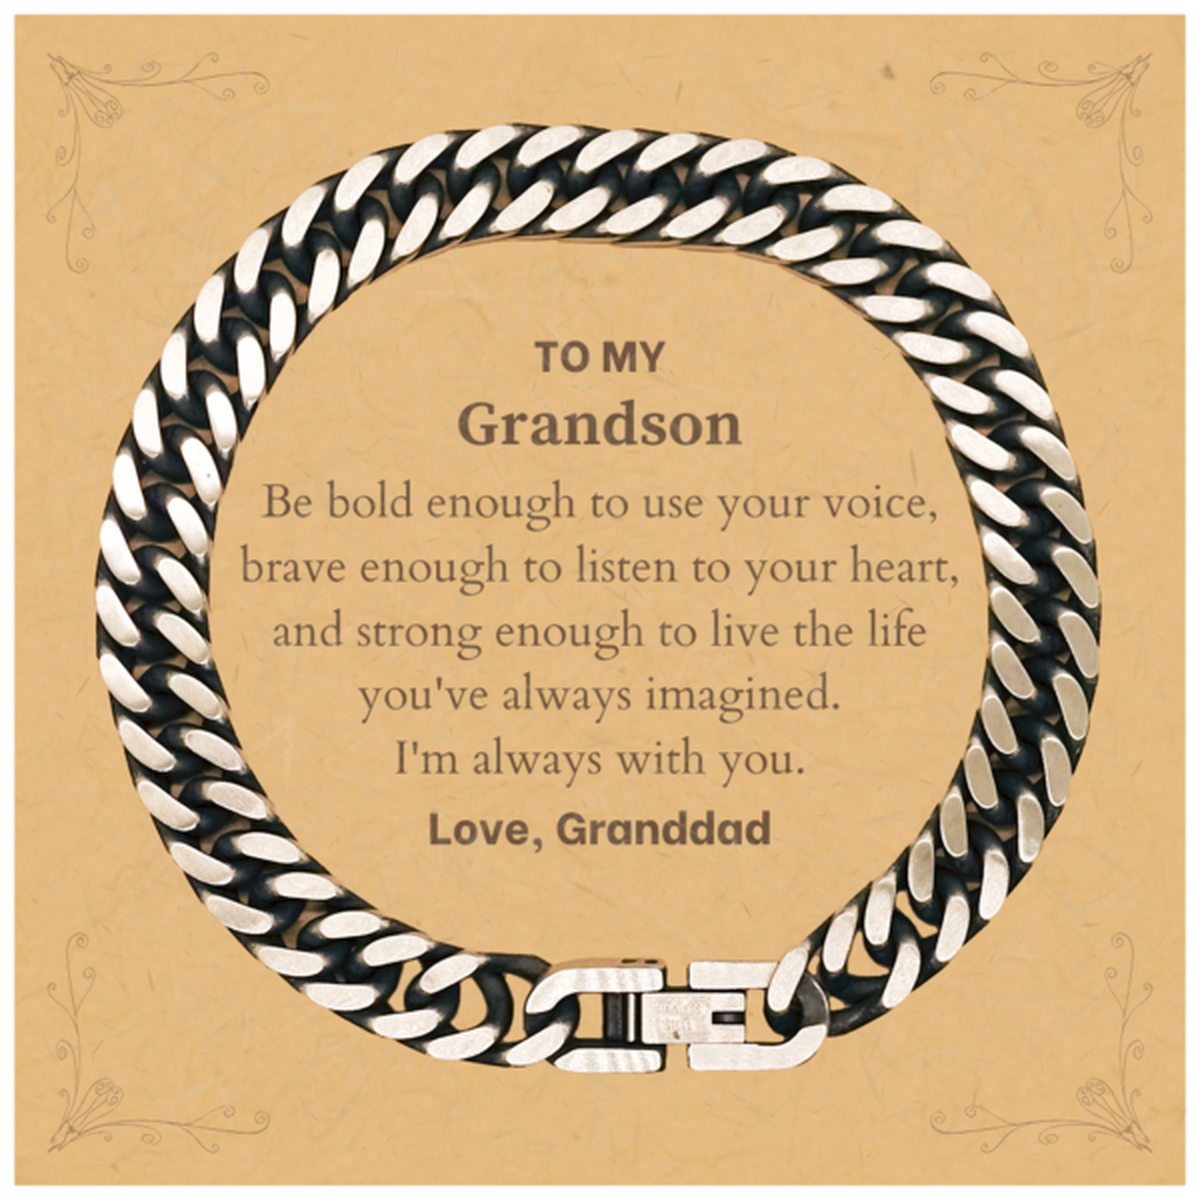 Keepsake Grandson Cuban Link Chain Bracelet Gift Idea Graduation Christmas Birthday Grandson from Granddad, Grandson Be bold enough to use your voice, brave enough to listen to your heart. Love, Granddad